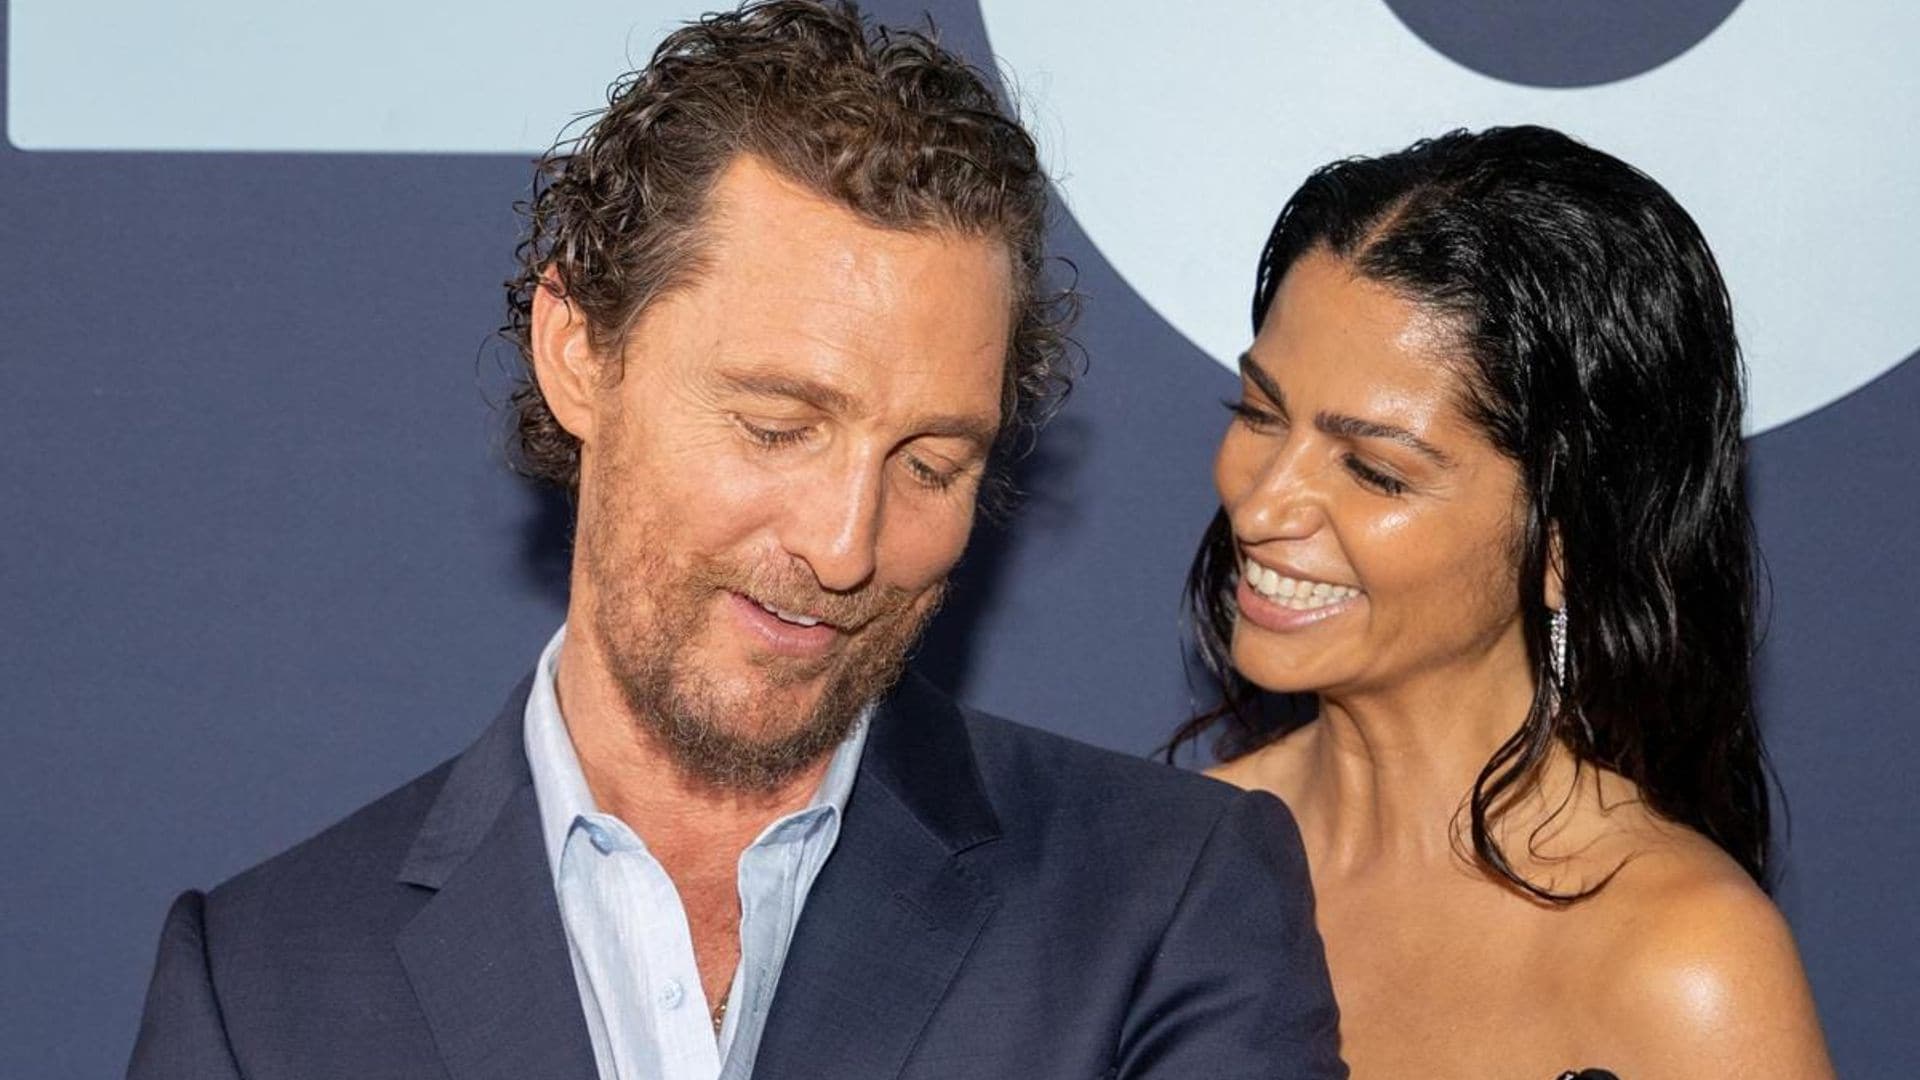 Matthew McConaughey and Camila Alves attend charity gala with family presence